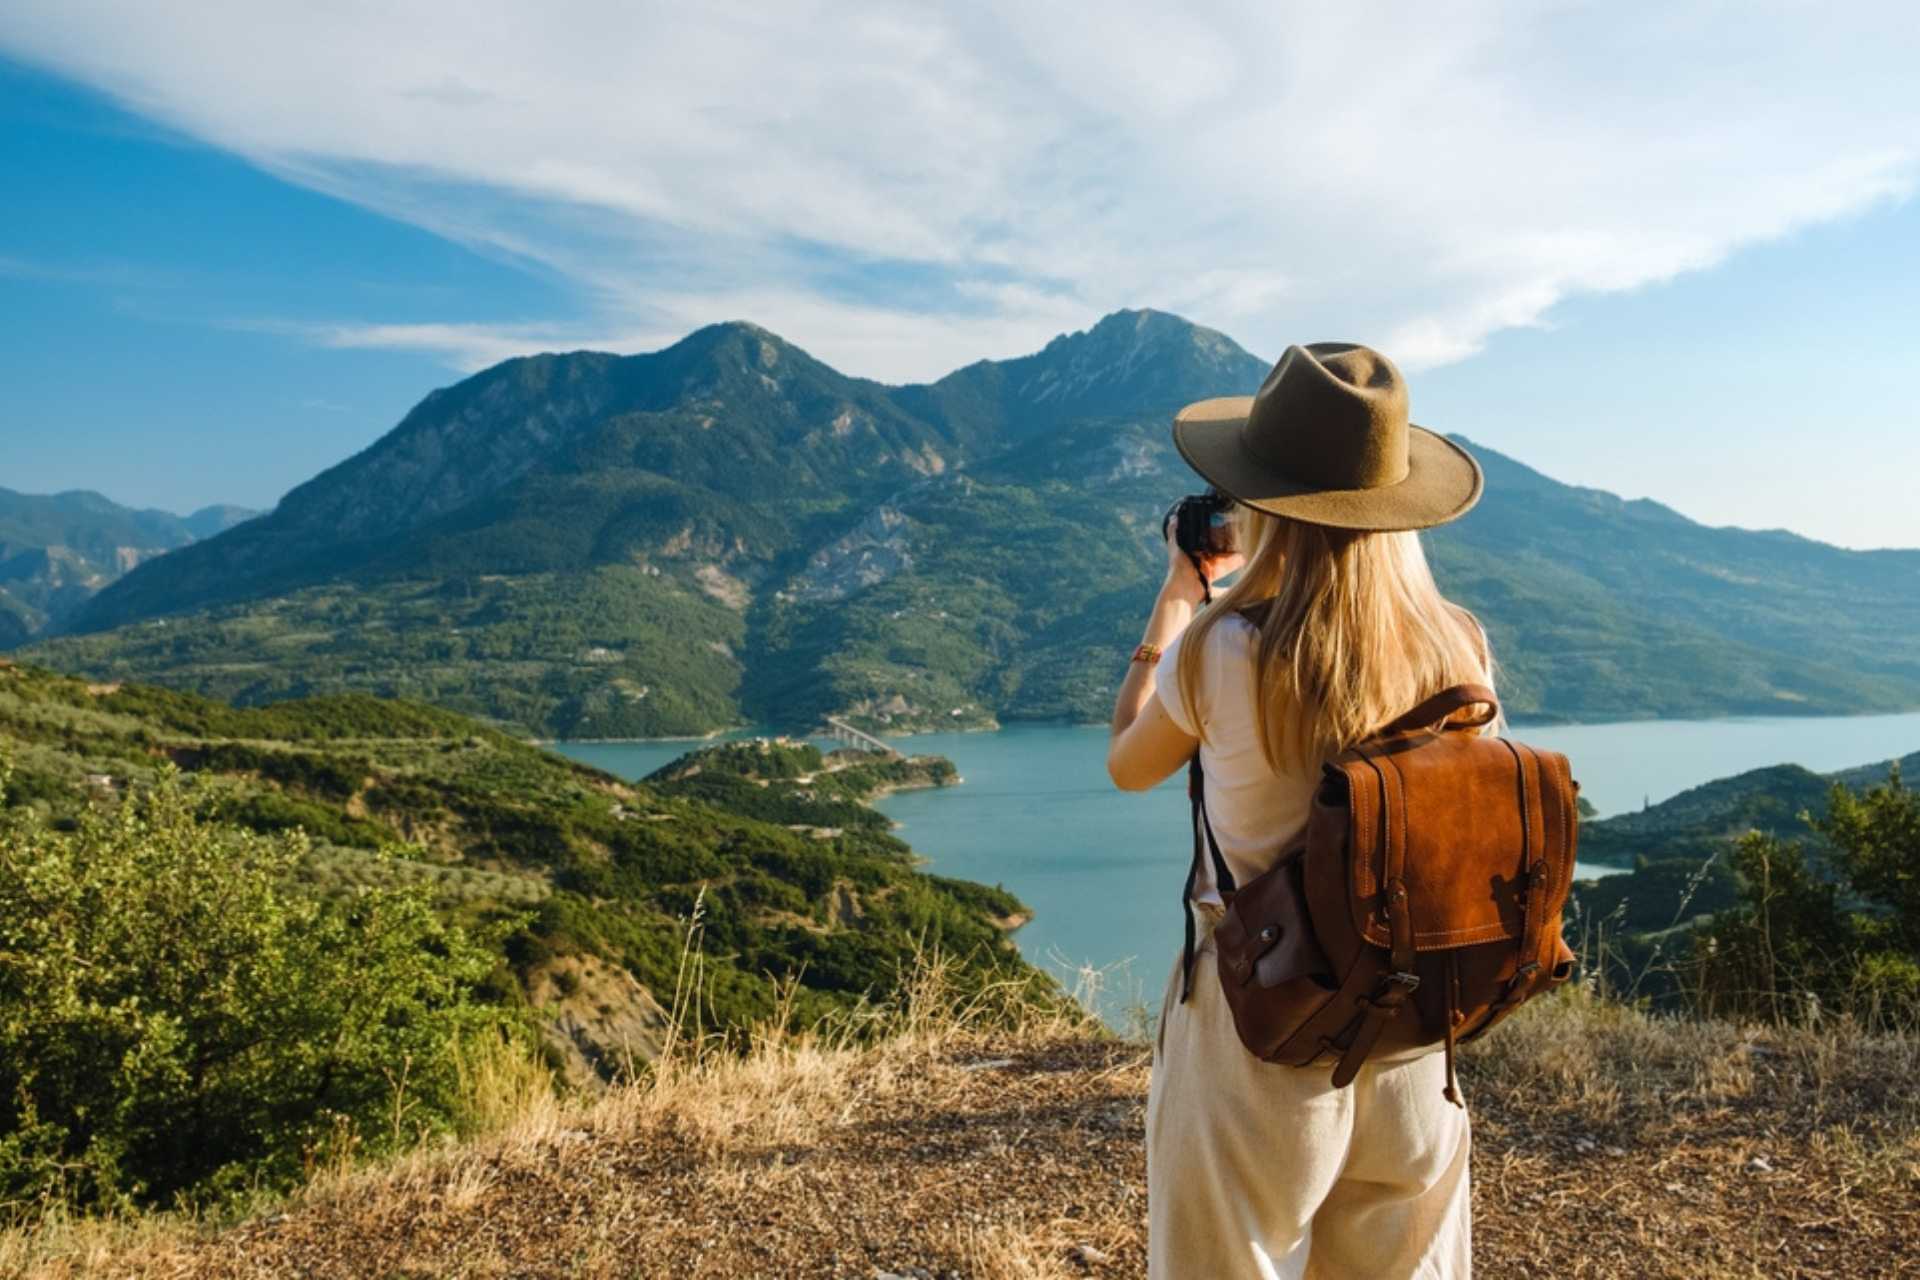 Woman photographer with big backpack taking photo of mountains and blue lake. Travel and hobby concept